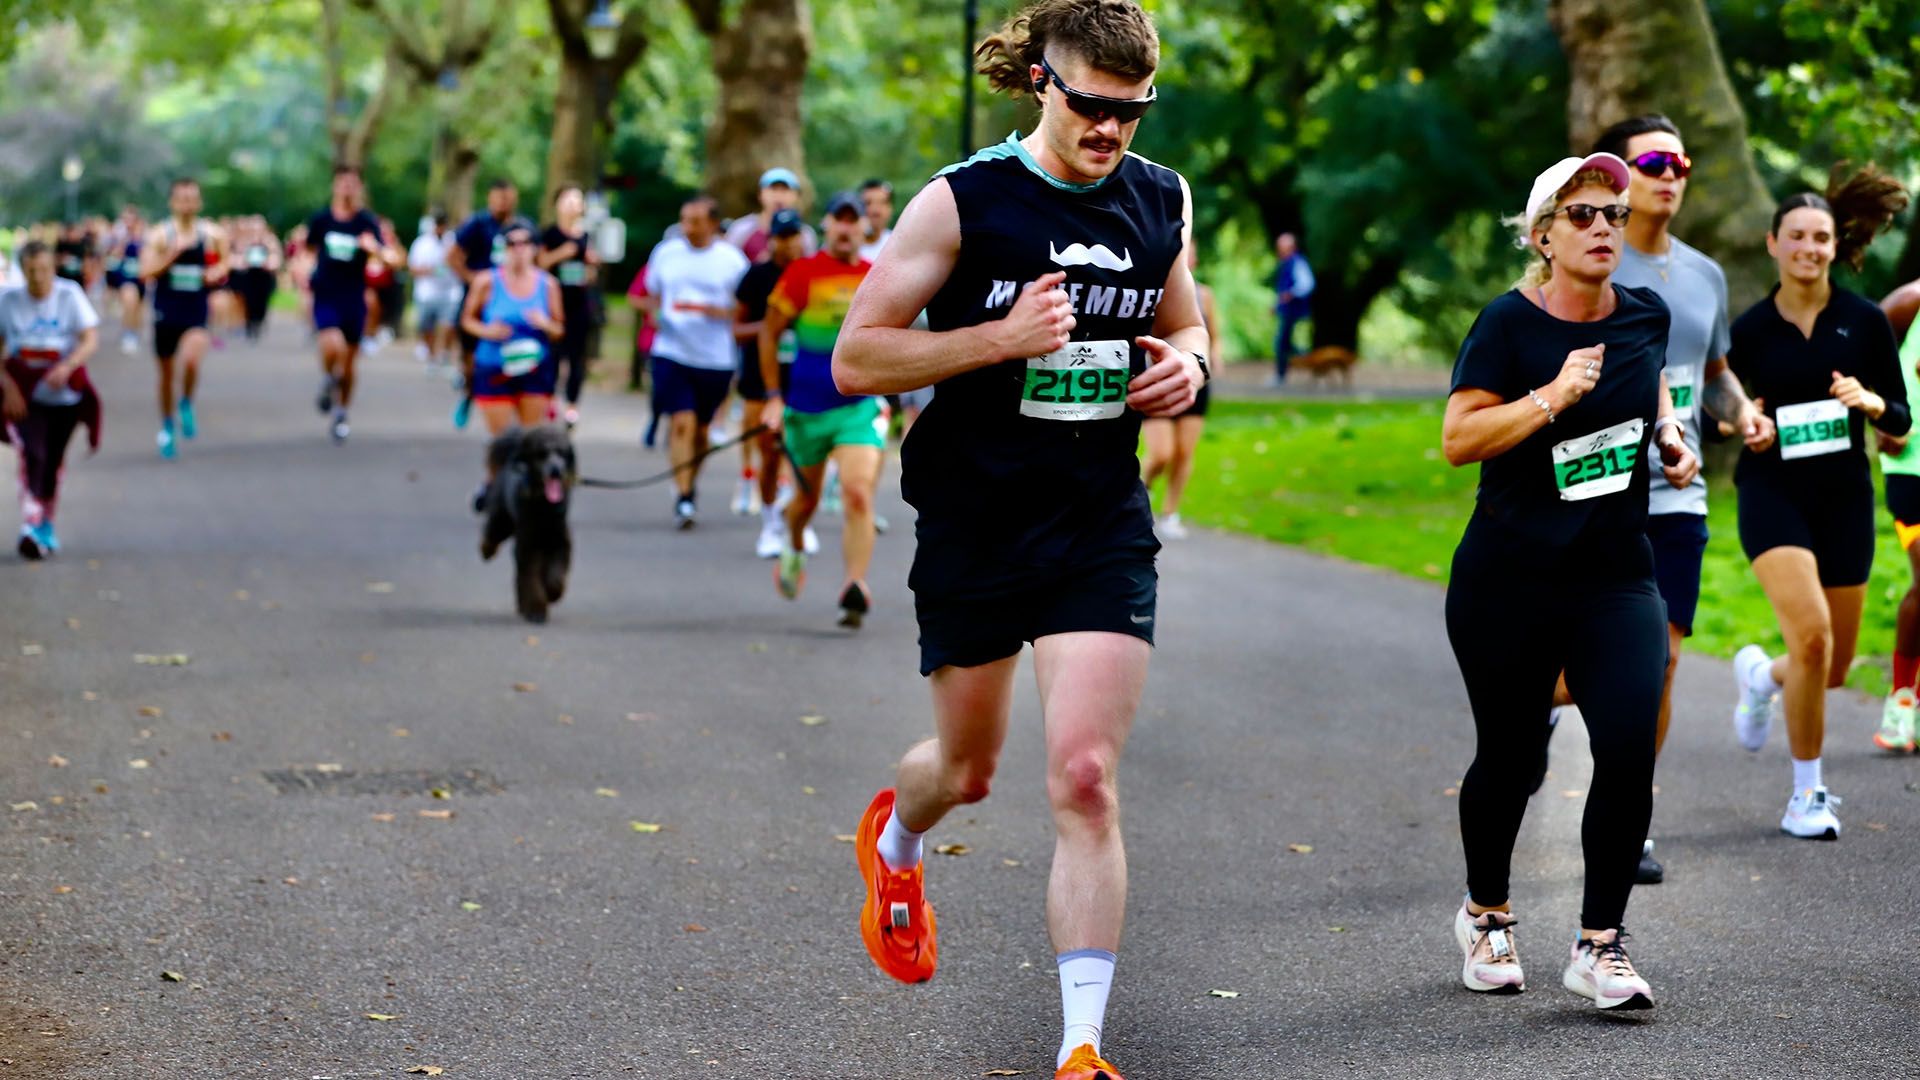 Photo of athletic man in Movember-branded running gear, powering toward camera in a public race.